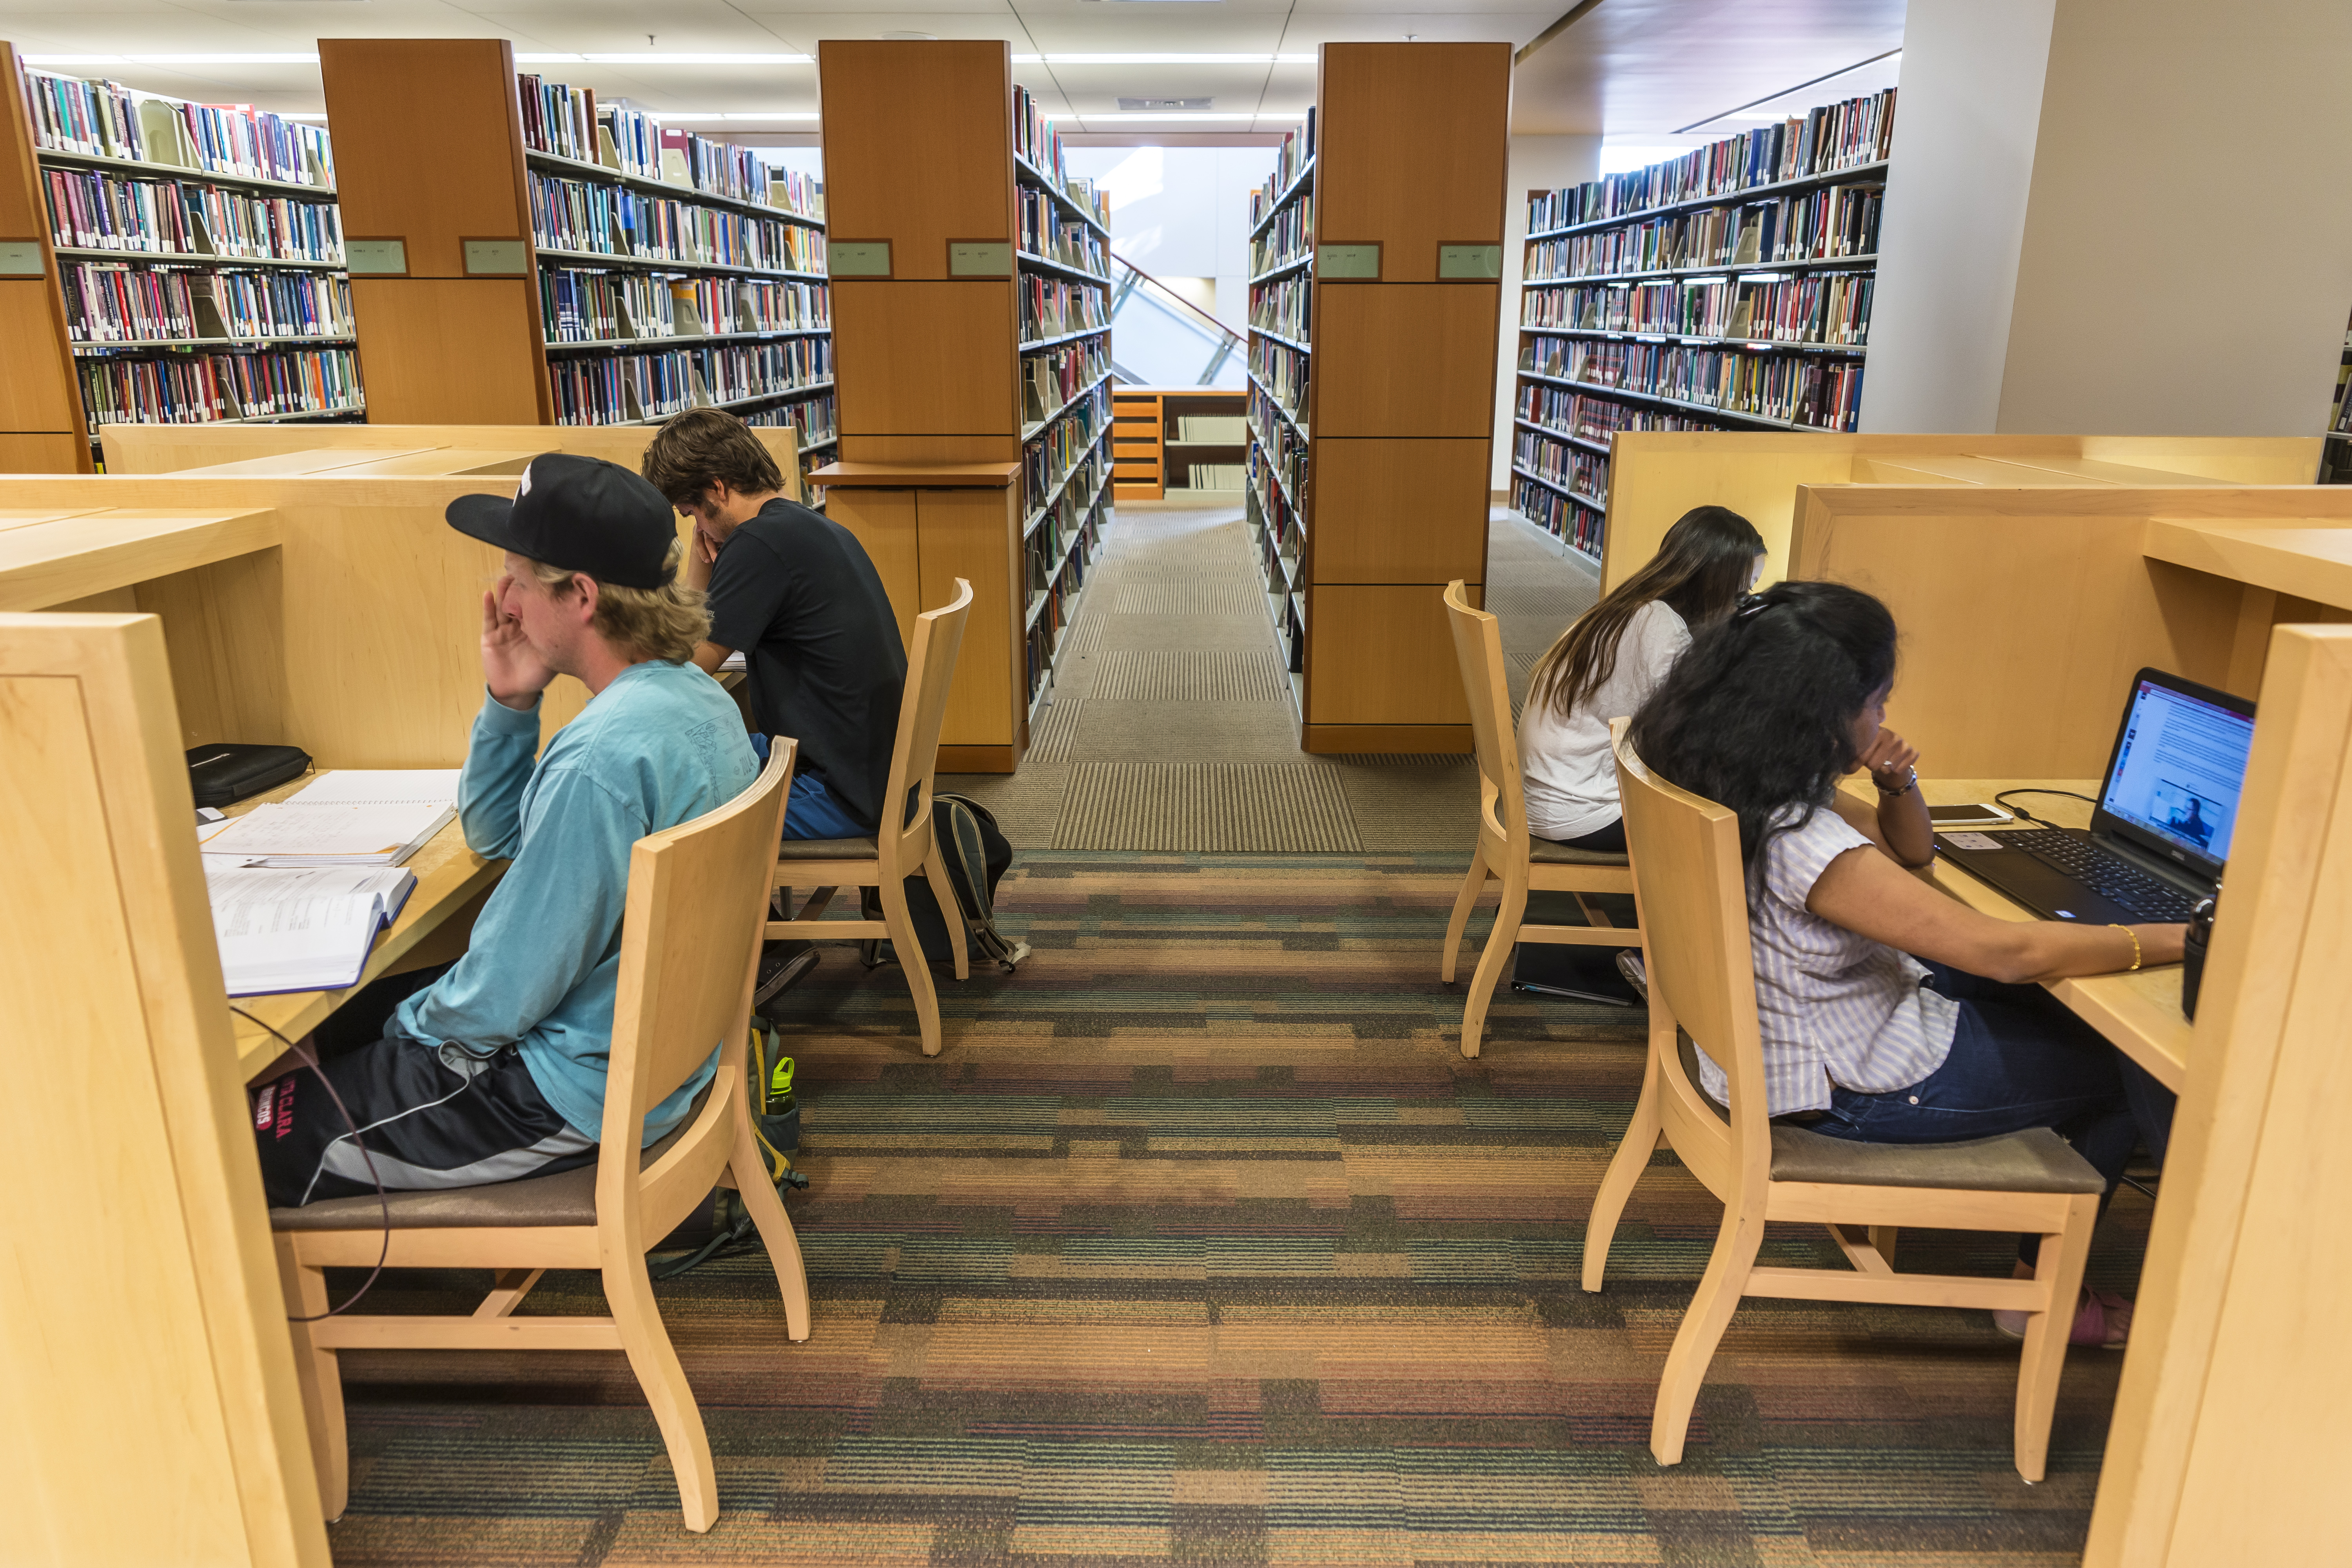 Four students studying on the lower level of the library